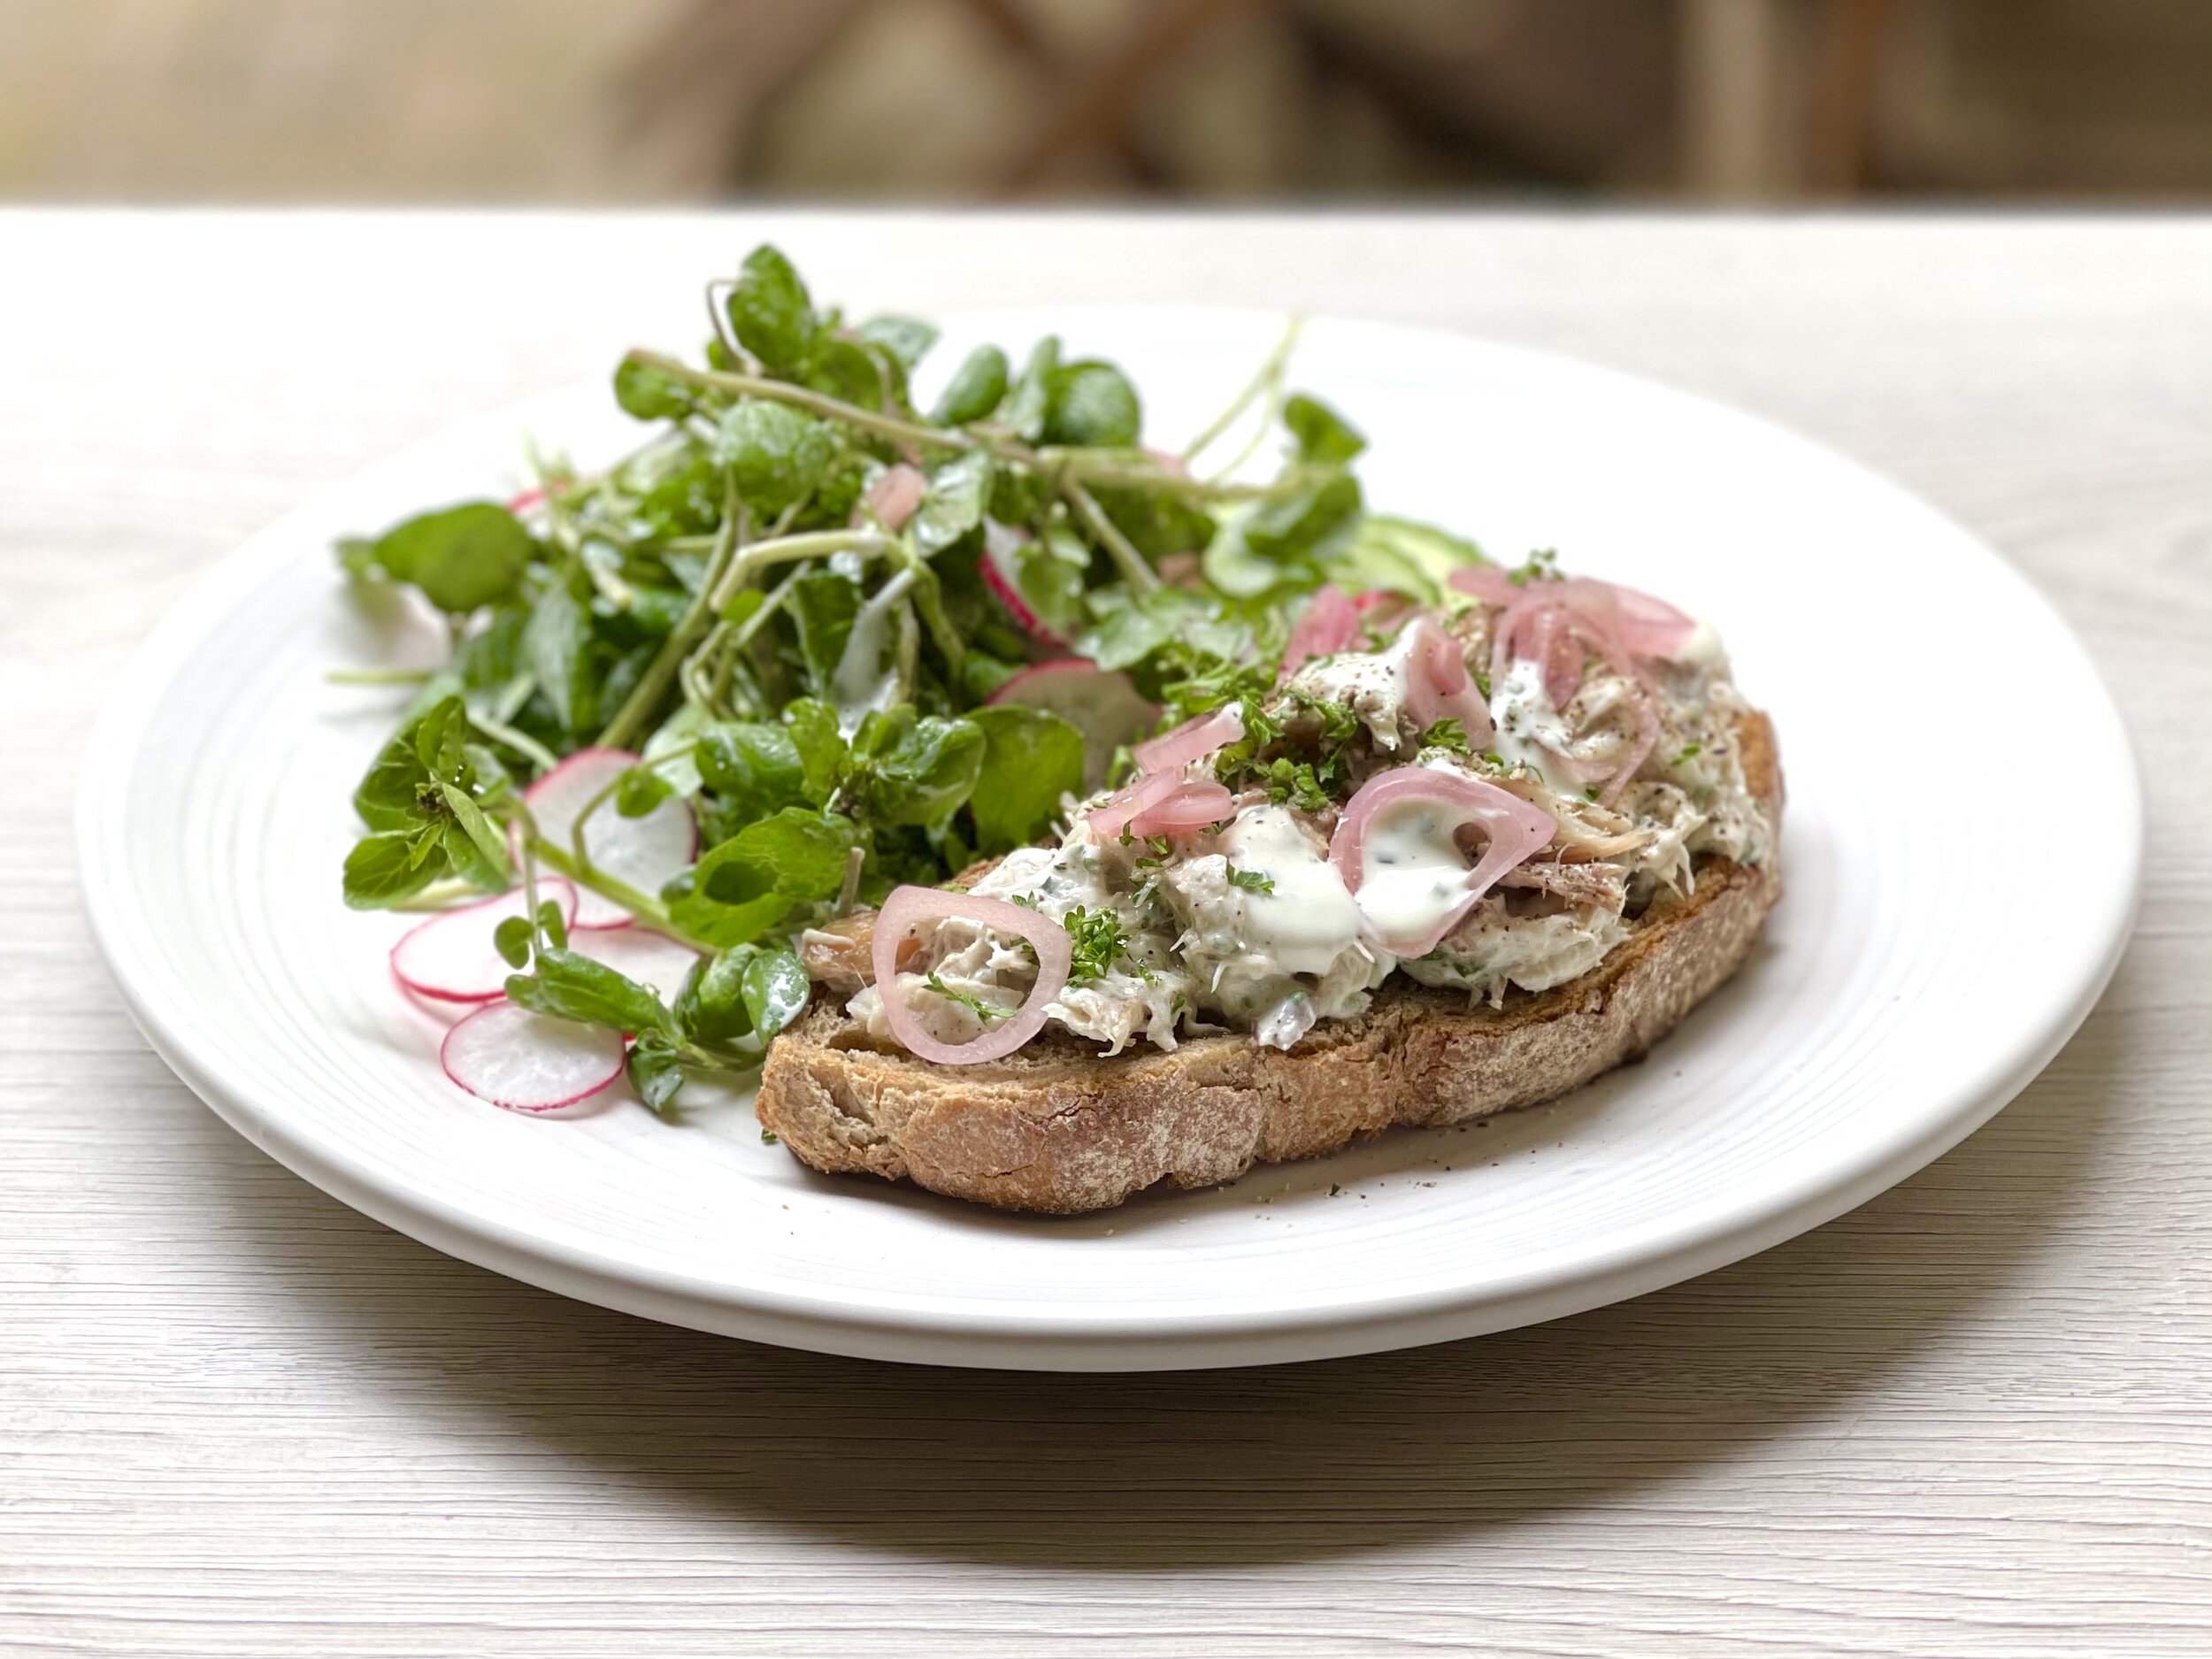 Smoked mackerel toasts, by Joey and Katy cook